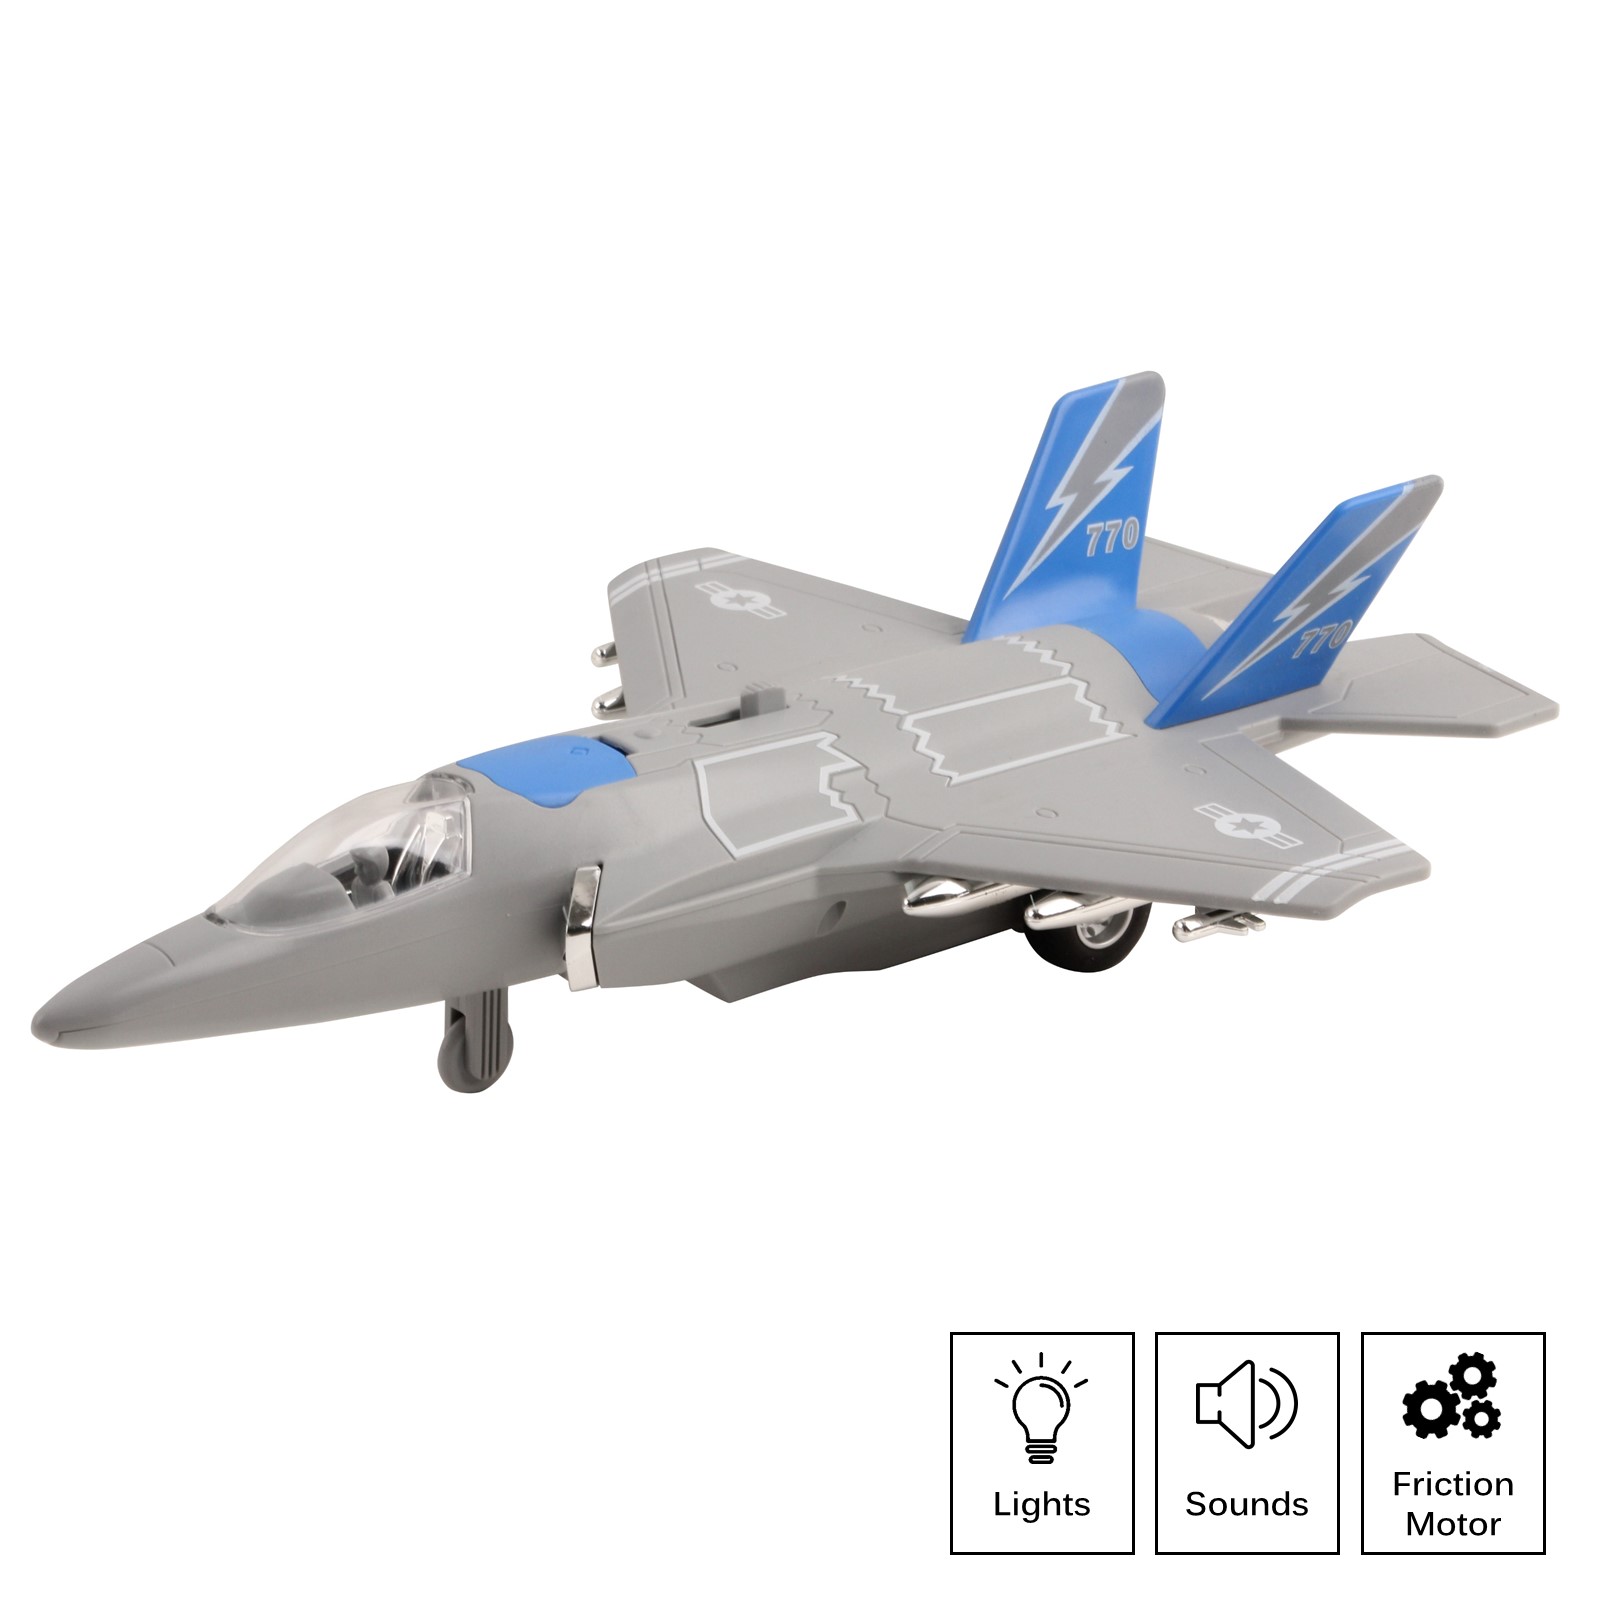 Army Air Force Fighter Jet F-22 Toy Military Airplane Friction Powered 1:16 Scale With Fun Lights And Sounds Pretend Play Quality Kids Action Bomber Aircraft Great Gift For Children Boys Girls